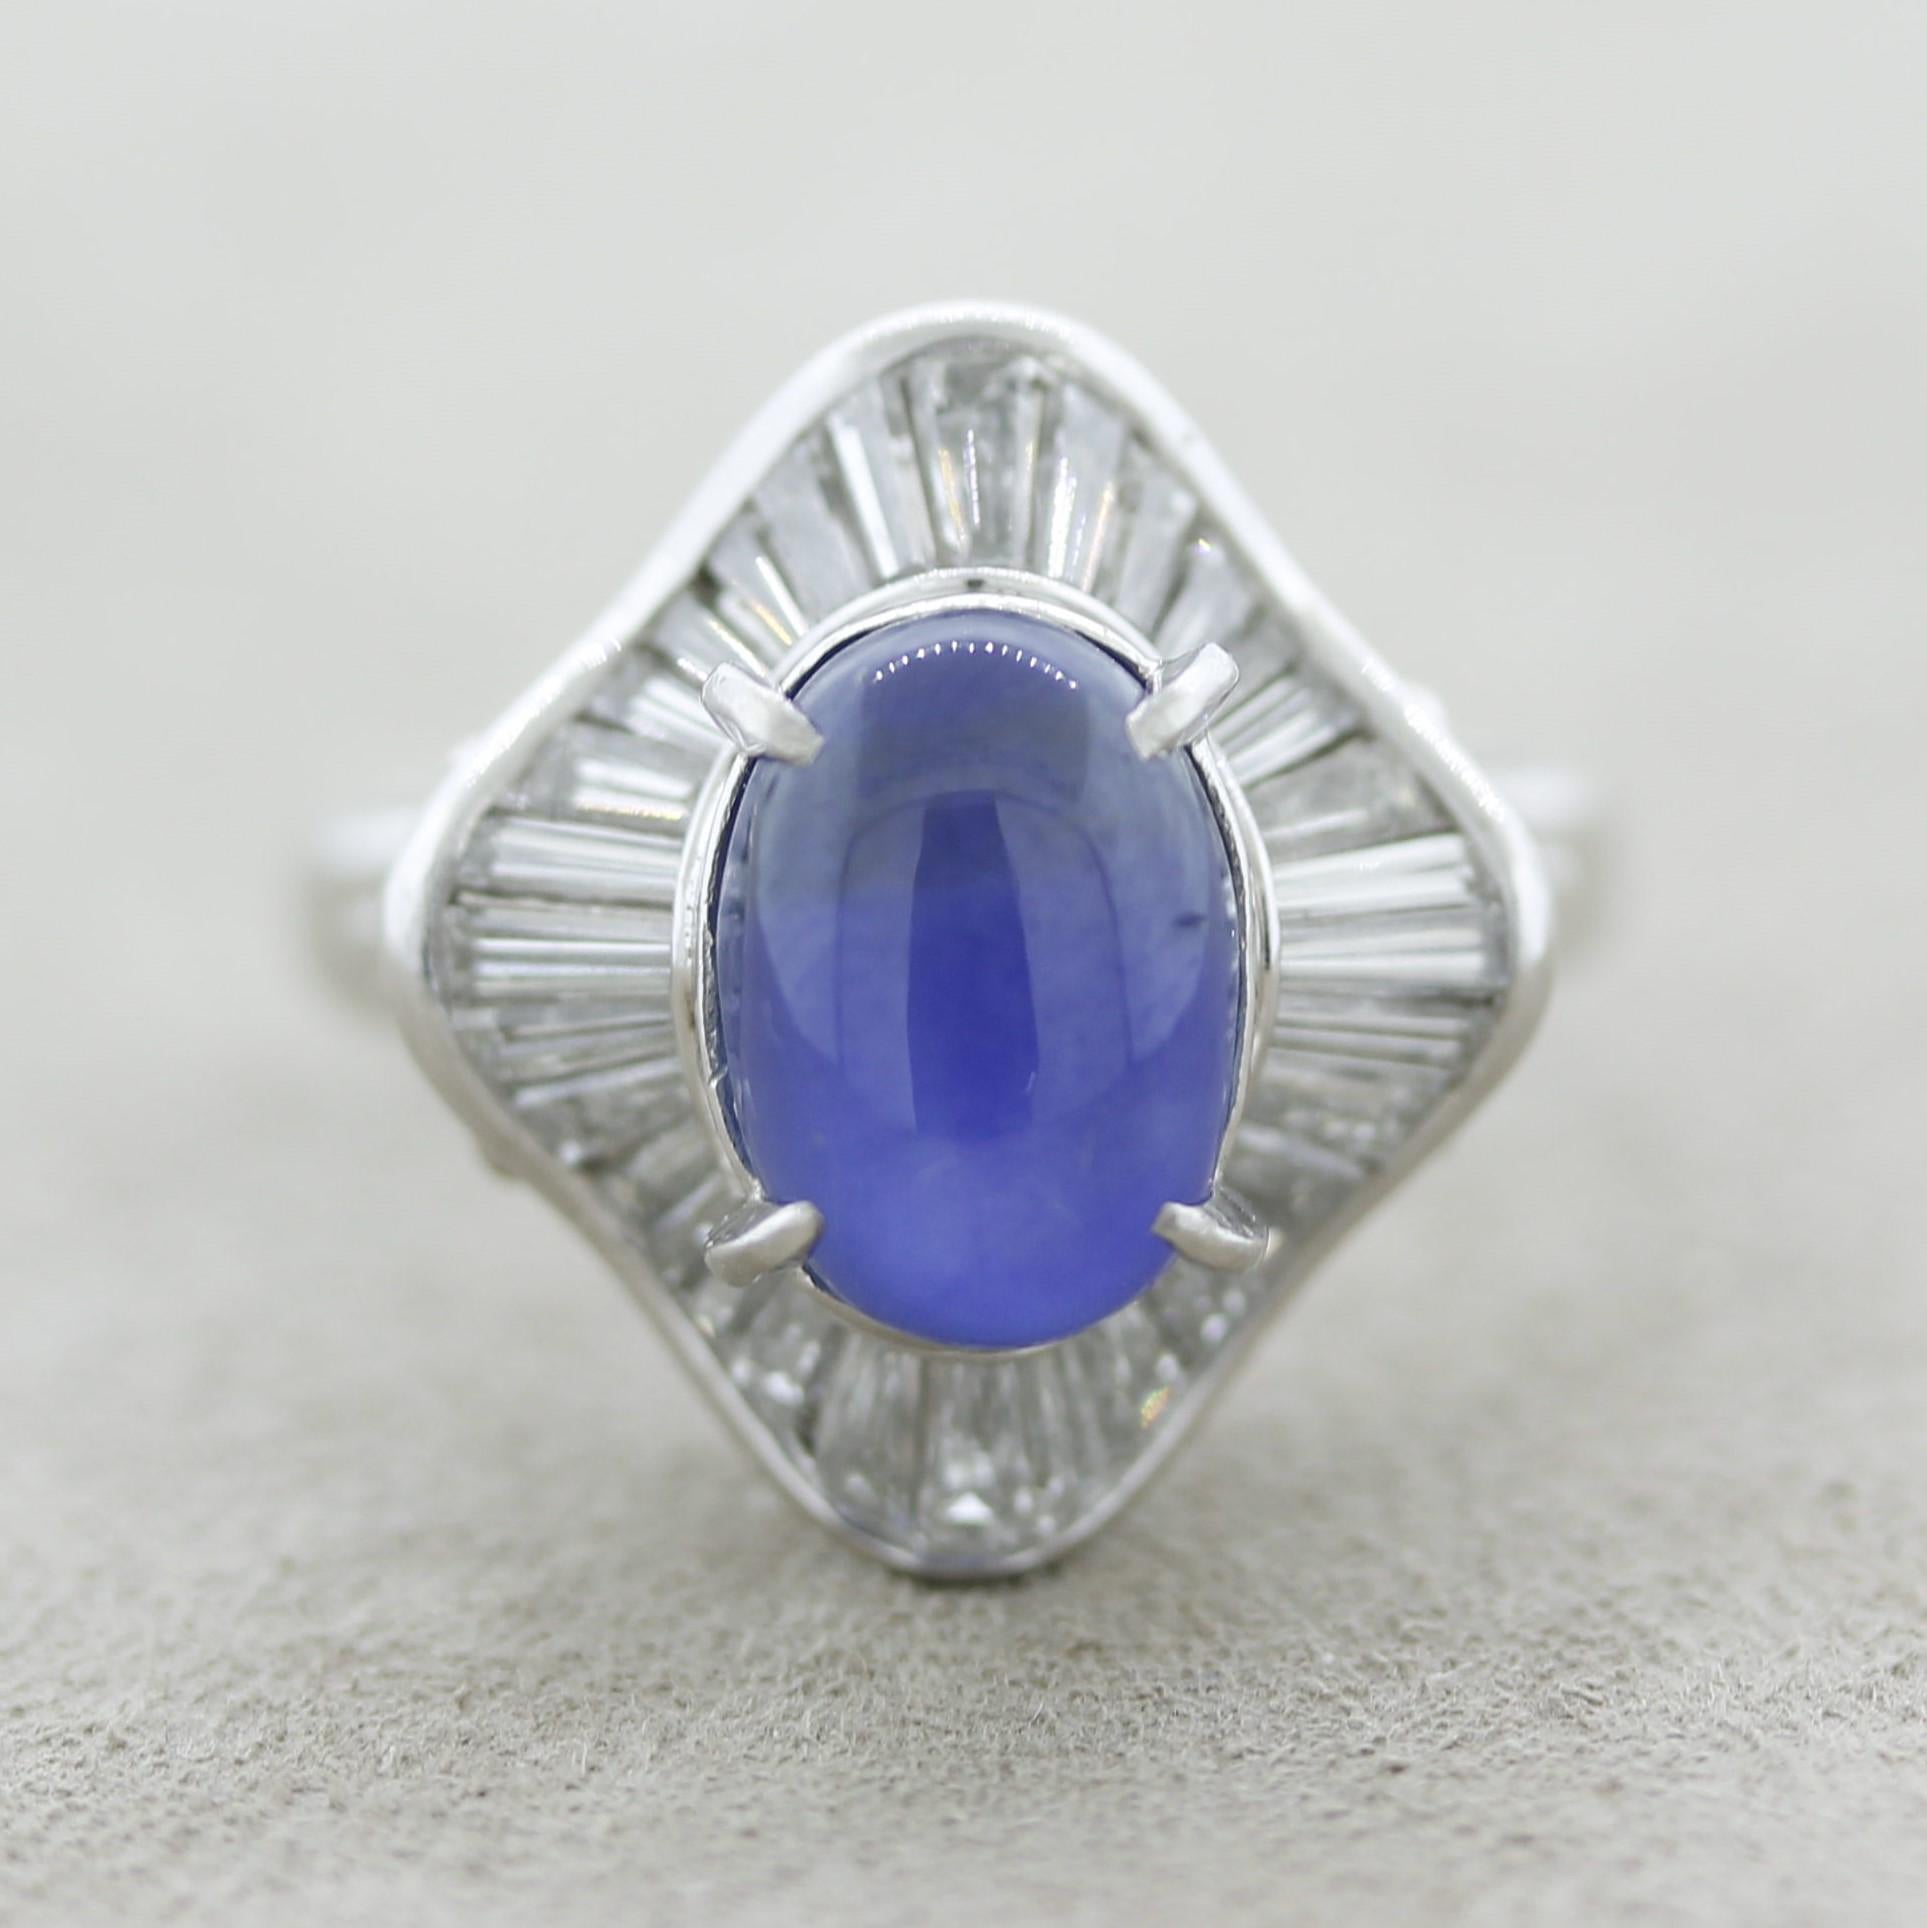 A sleek and stylish ring featuring a 6.18 carat star sapphire with a rich blue color. Adding to that it has a strong 6-rayed star (asterism) when a light hits the stone. Can be seen quite well in direct sunlight. It is complemented by 1.18 carats of